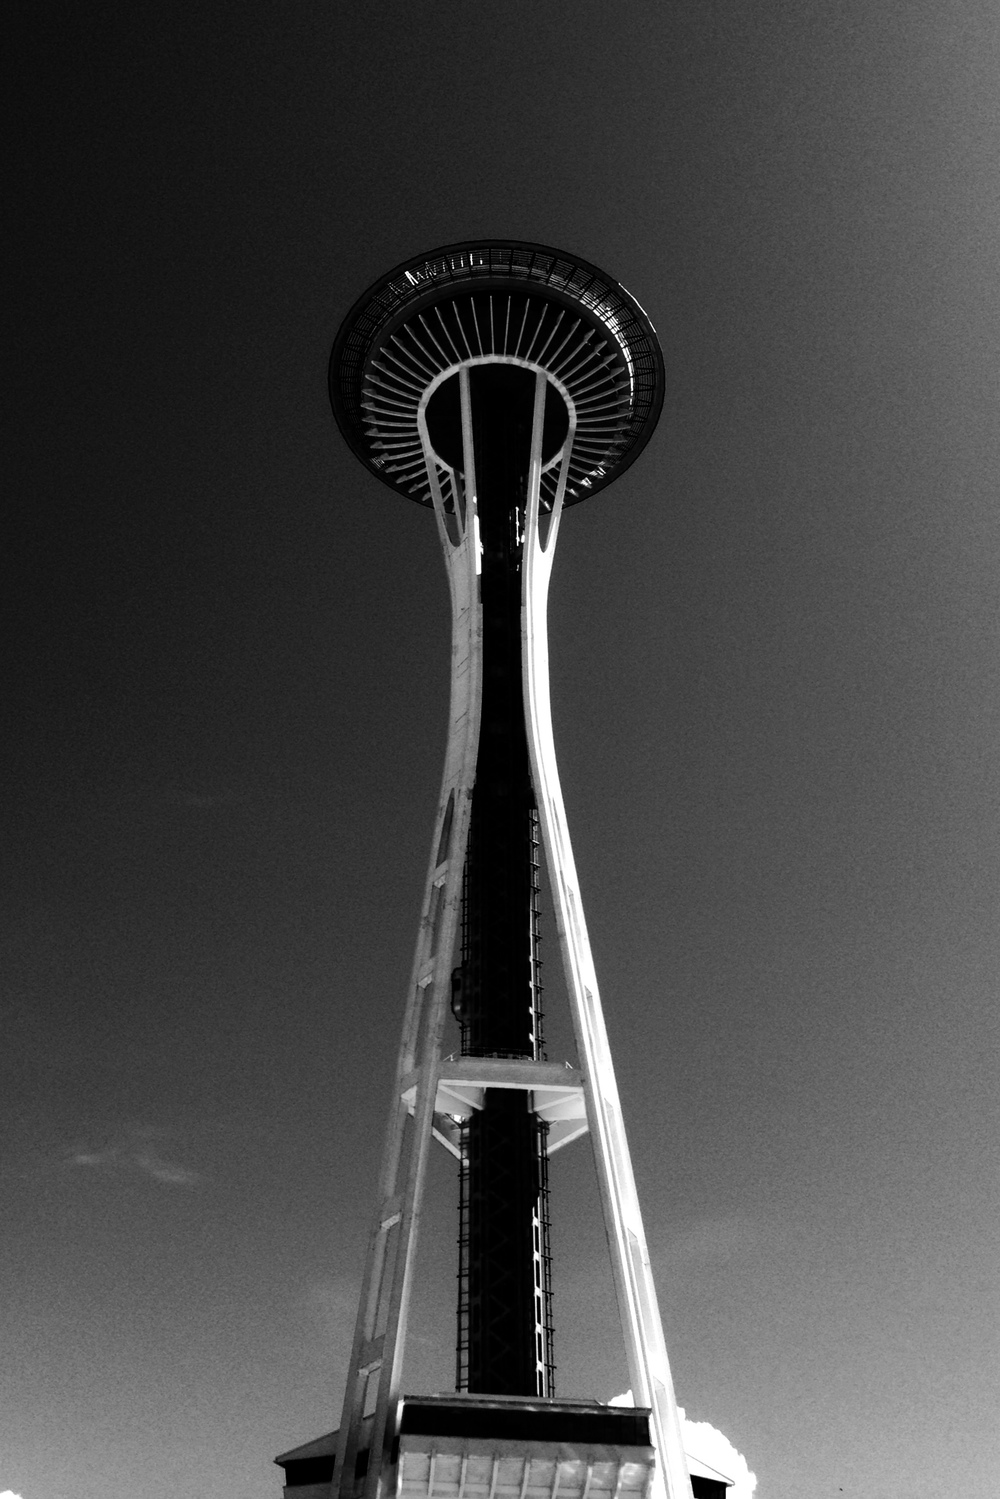 My Grandma and Grandpa took me up the Space Needle when I was really young. It was great to experience it again!